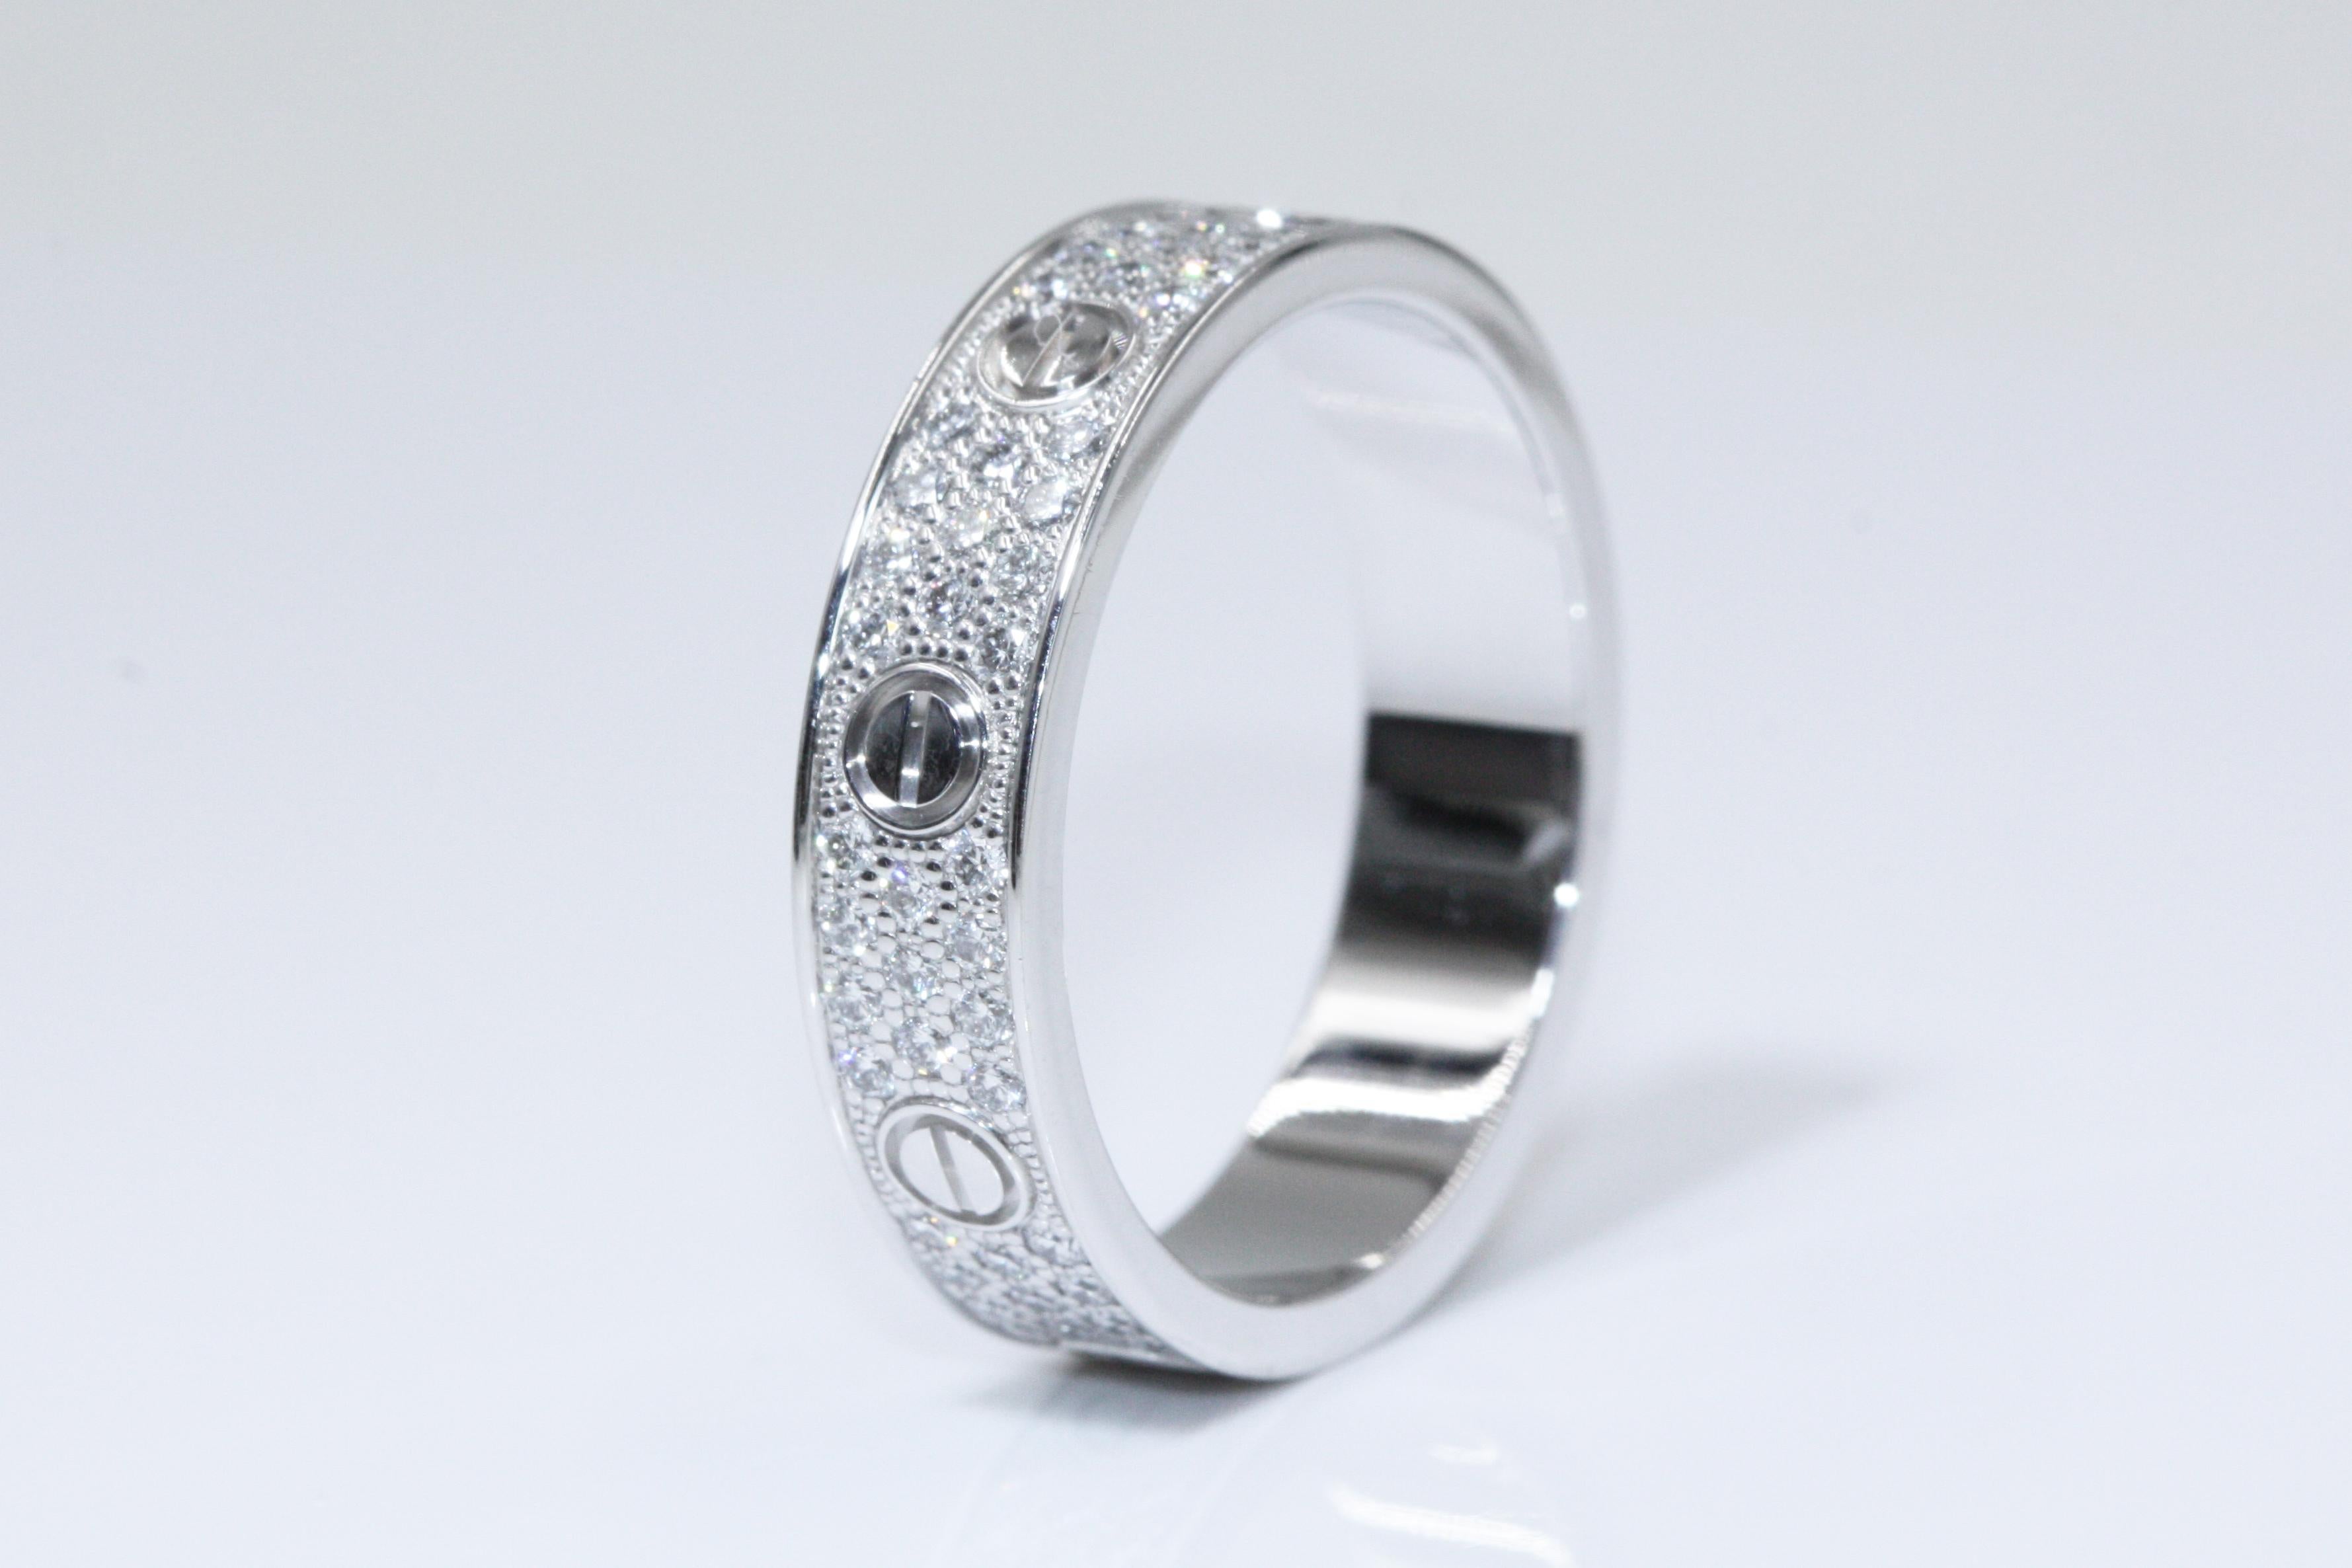 A beautiful Love Wedding band diamond ring from Cartier. The ring is made in 18K white gold set with paved diamonds. REF: B4083454

Ring Measurement: 
Weight: approximate 3.83g
Width: approximate 4.00mm
Size EU 49 US 4.75
This item will come with an